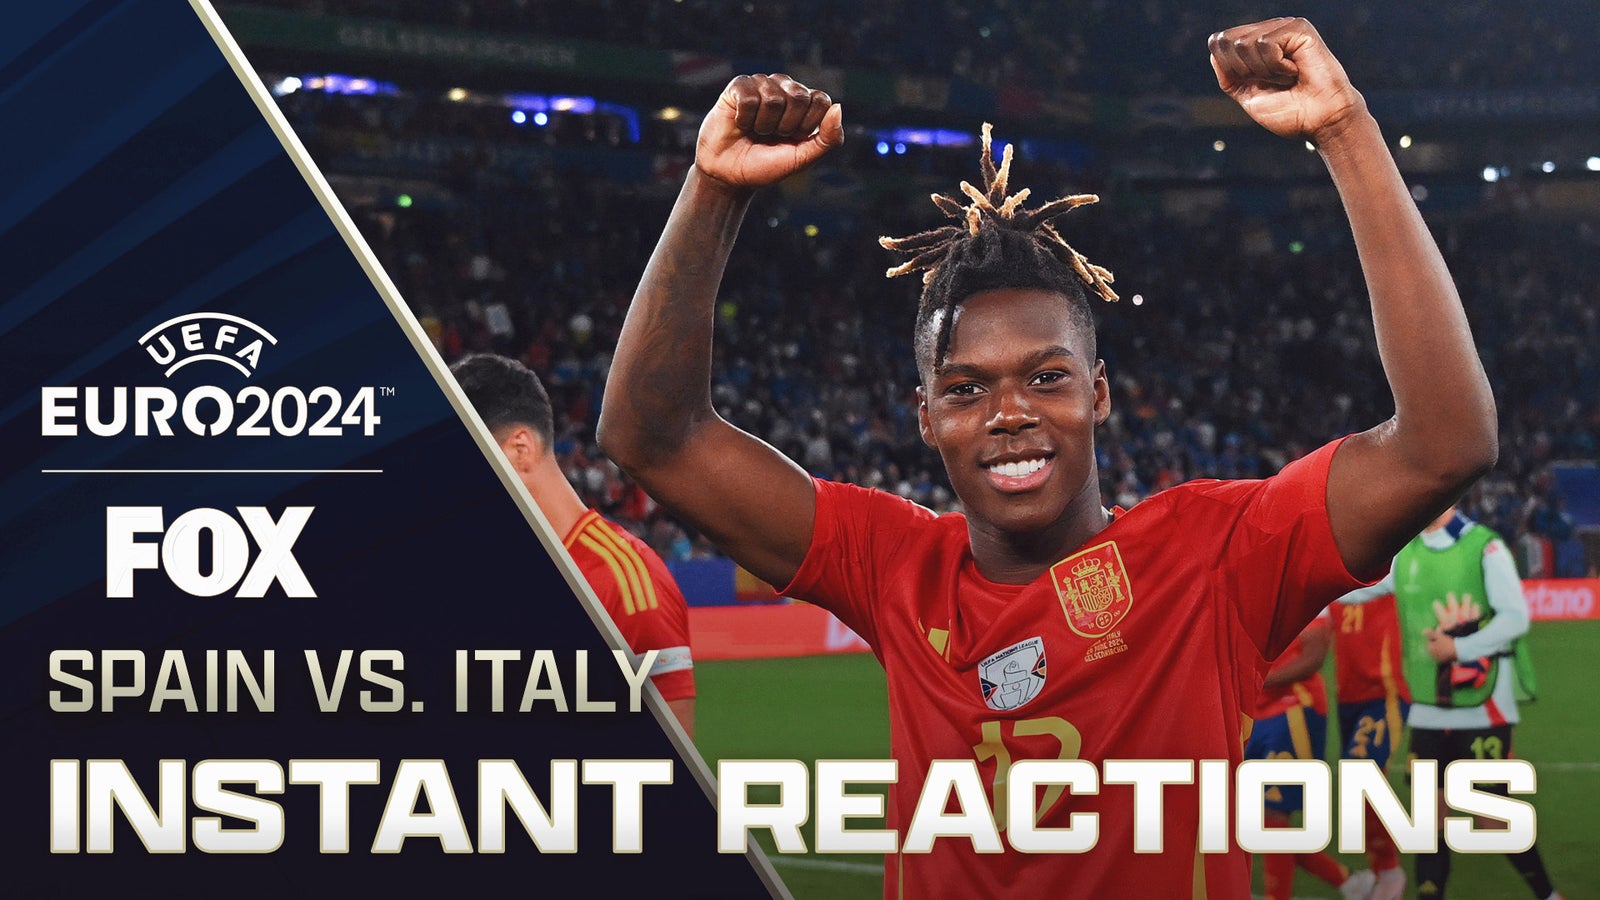 Spain vs. Italy instant reaction: Is Spain the team to beat?